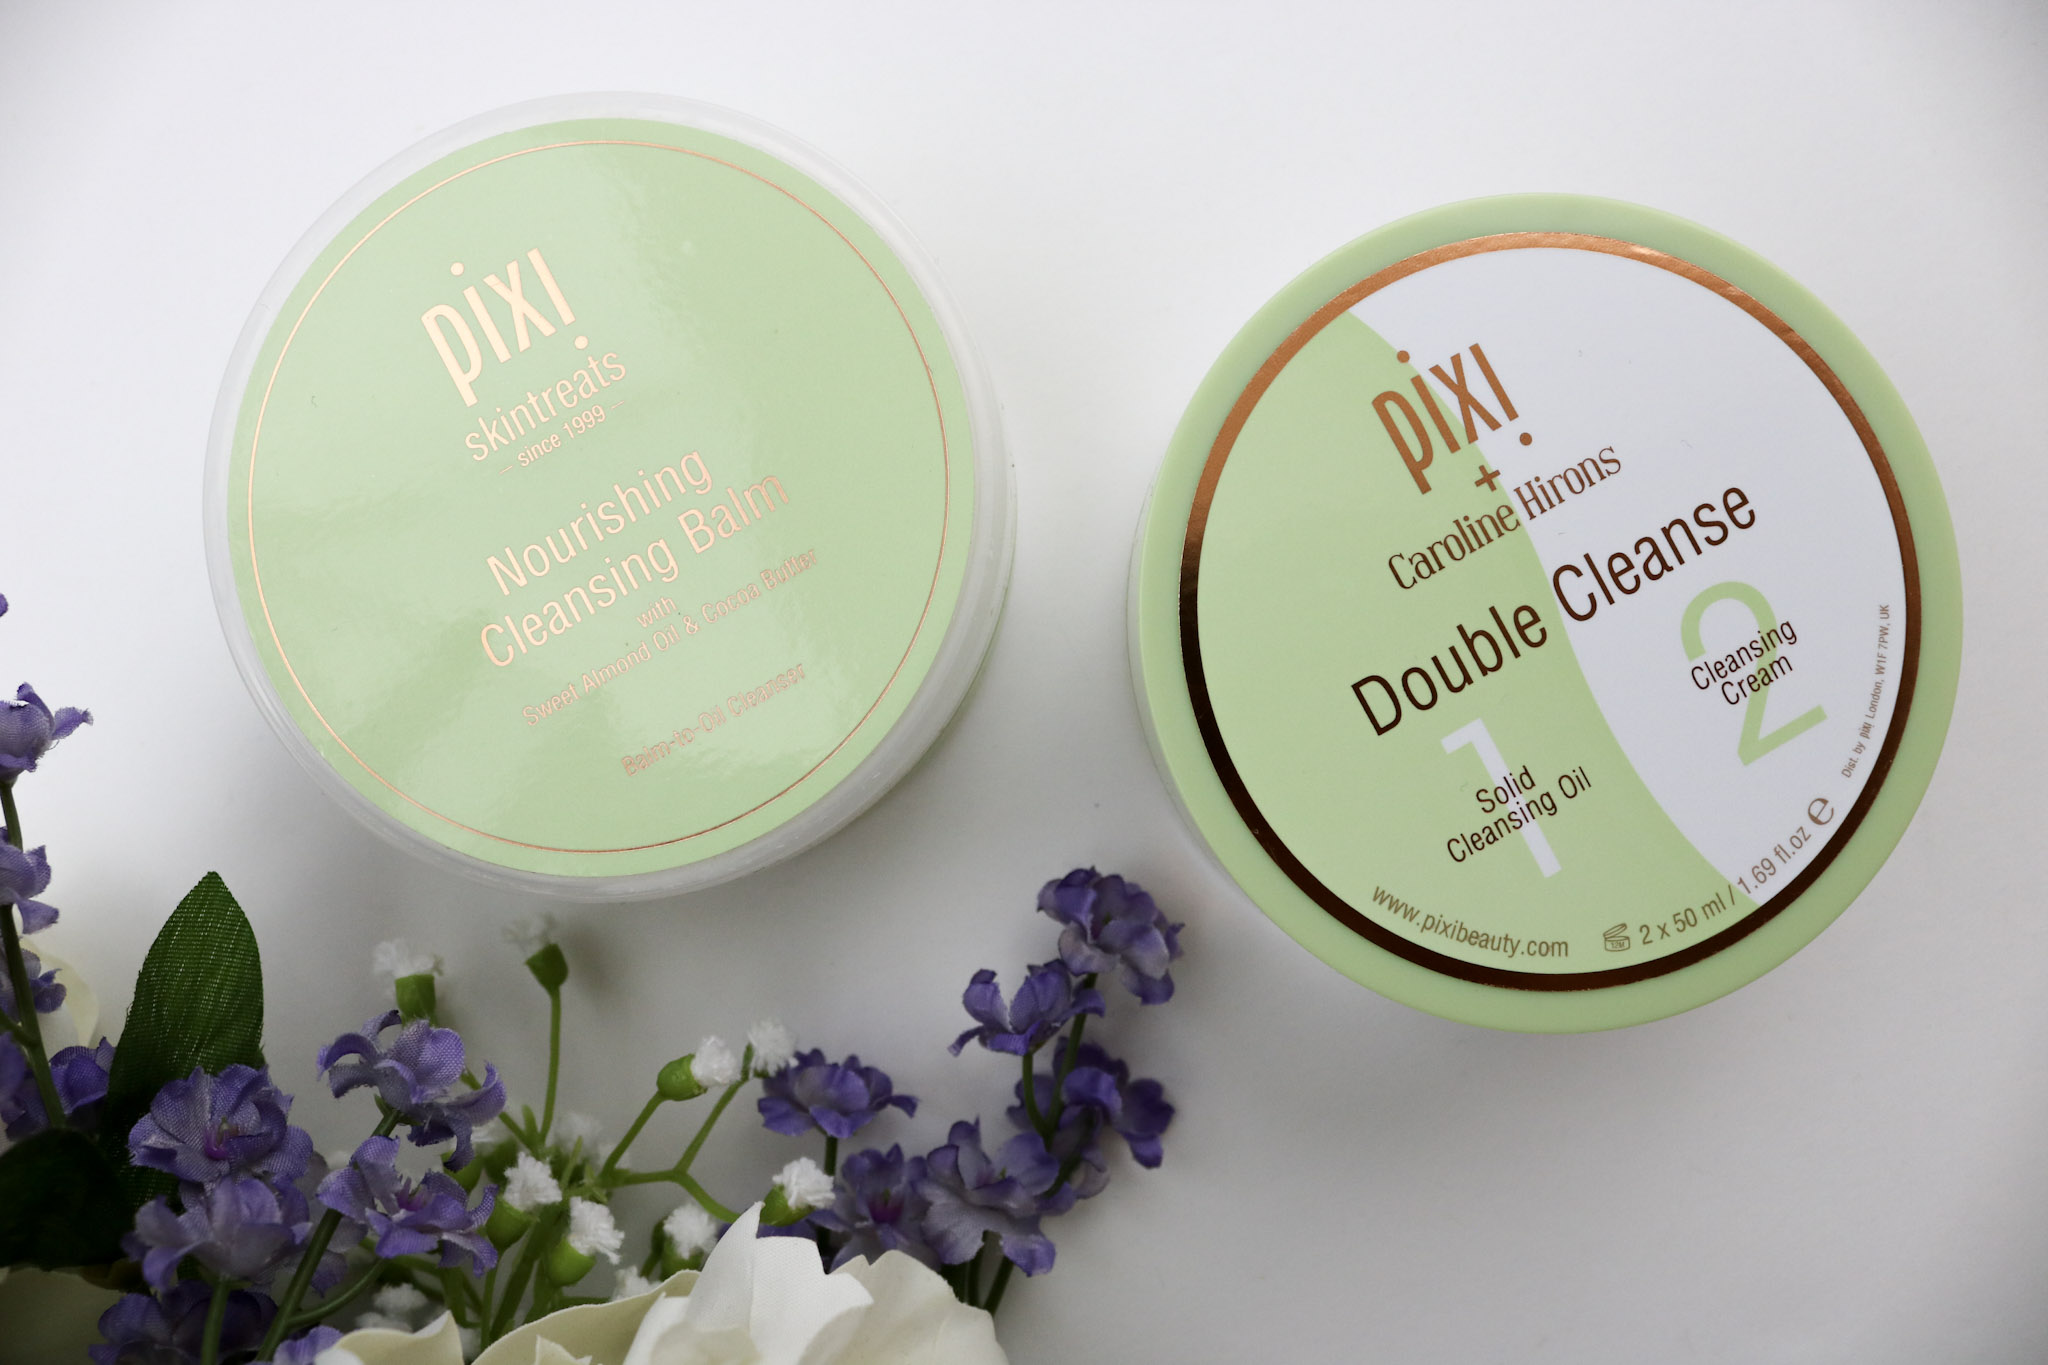 pixi-double-cleanse-vs-nourishing-cleansing-balm